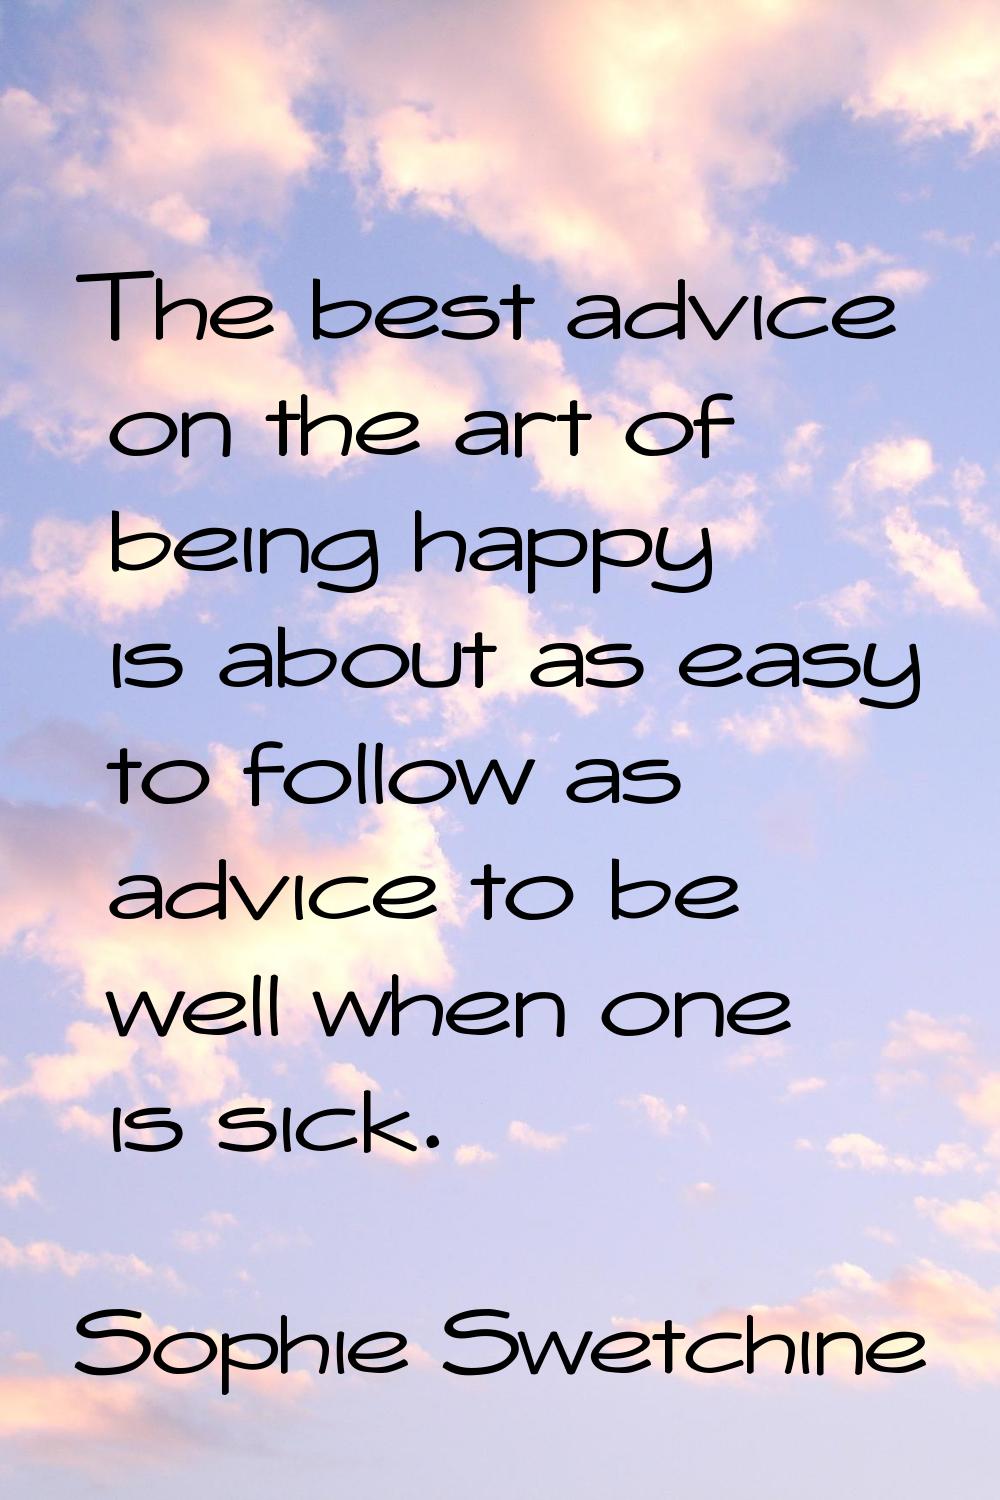 The best advice on the art of being happy is about as easy to follow as advice to be well when one 